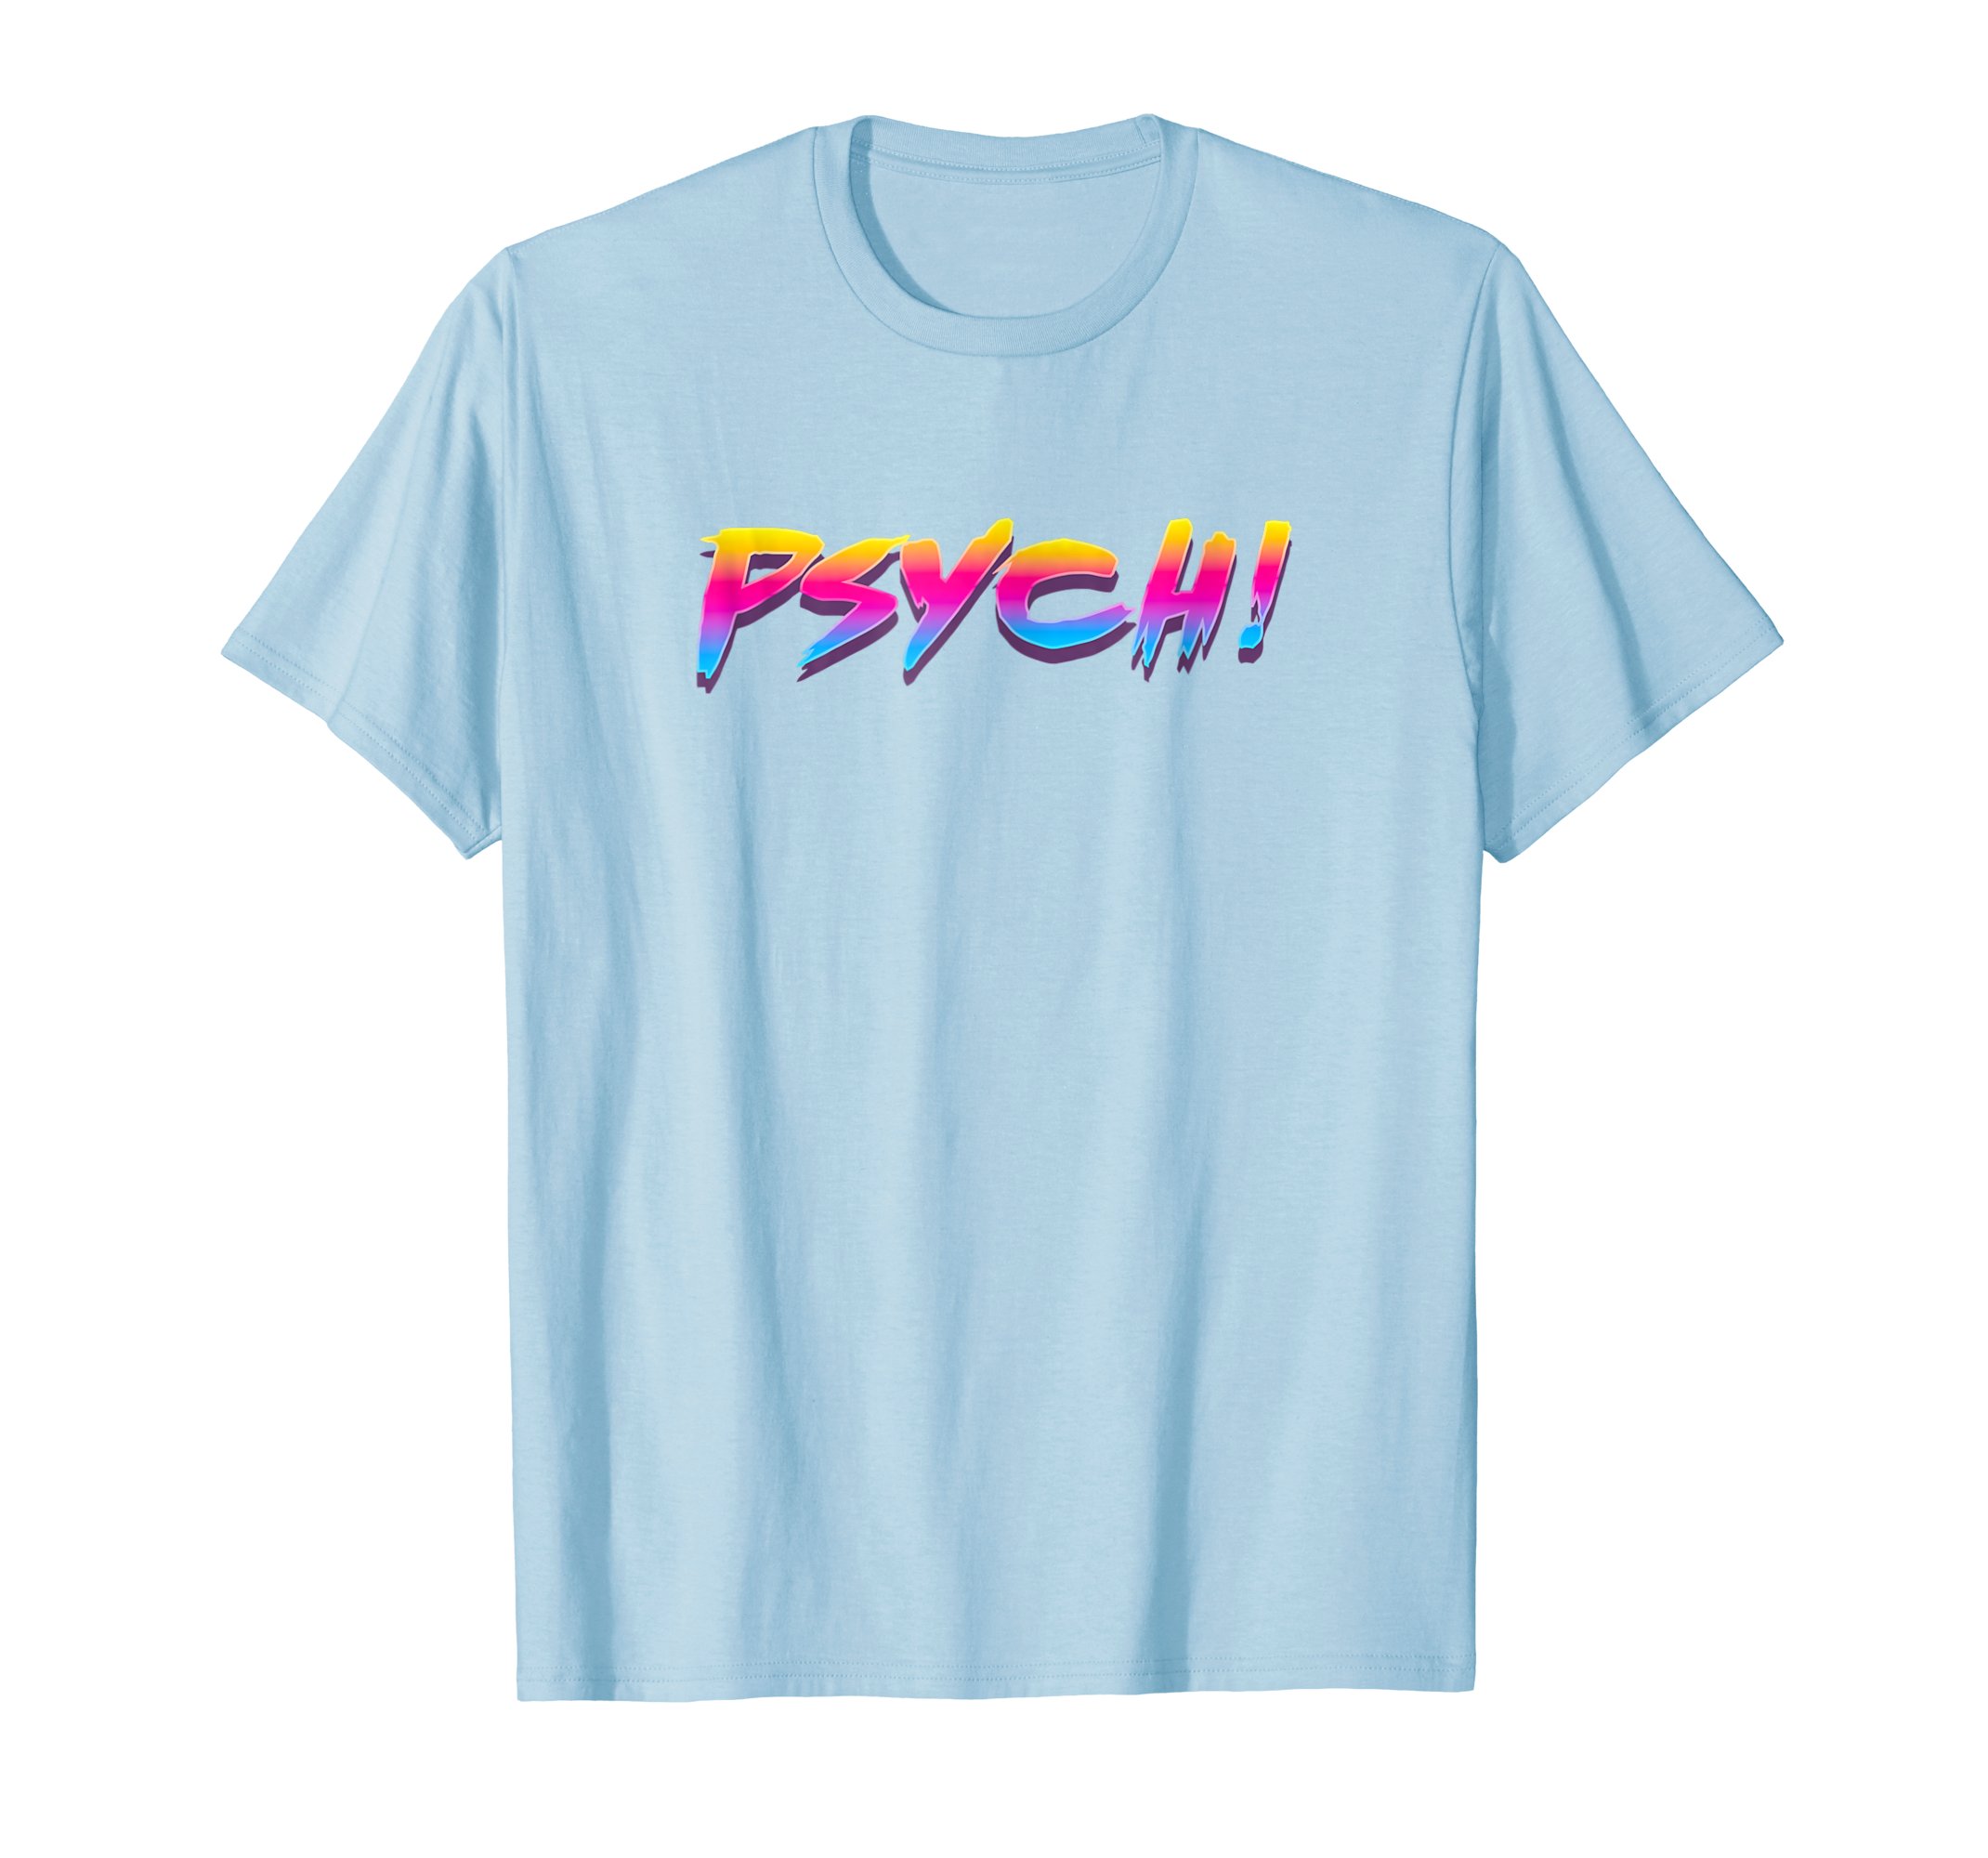 Brandon Charnell Psych Retro 80s 90s Vintage Neon T-Shirt Radical Outrun